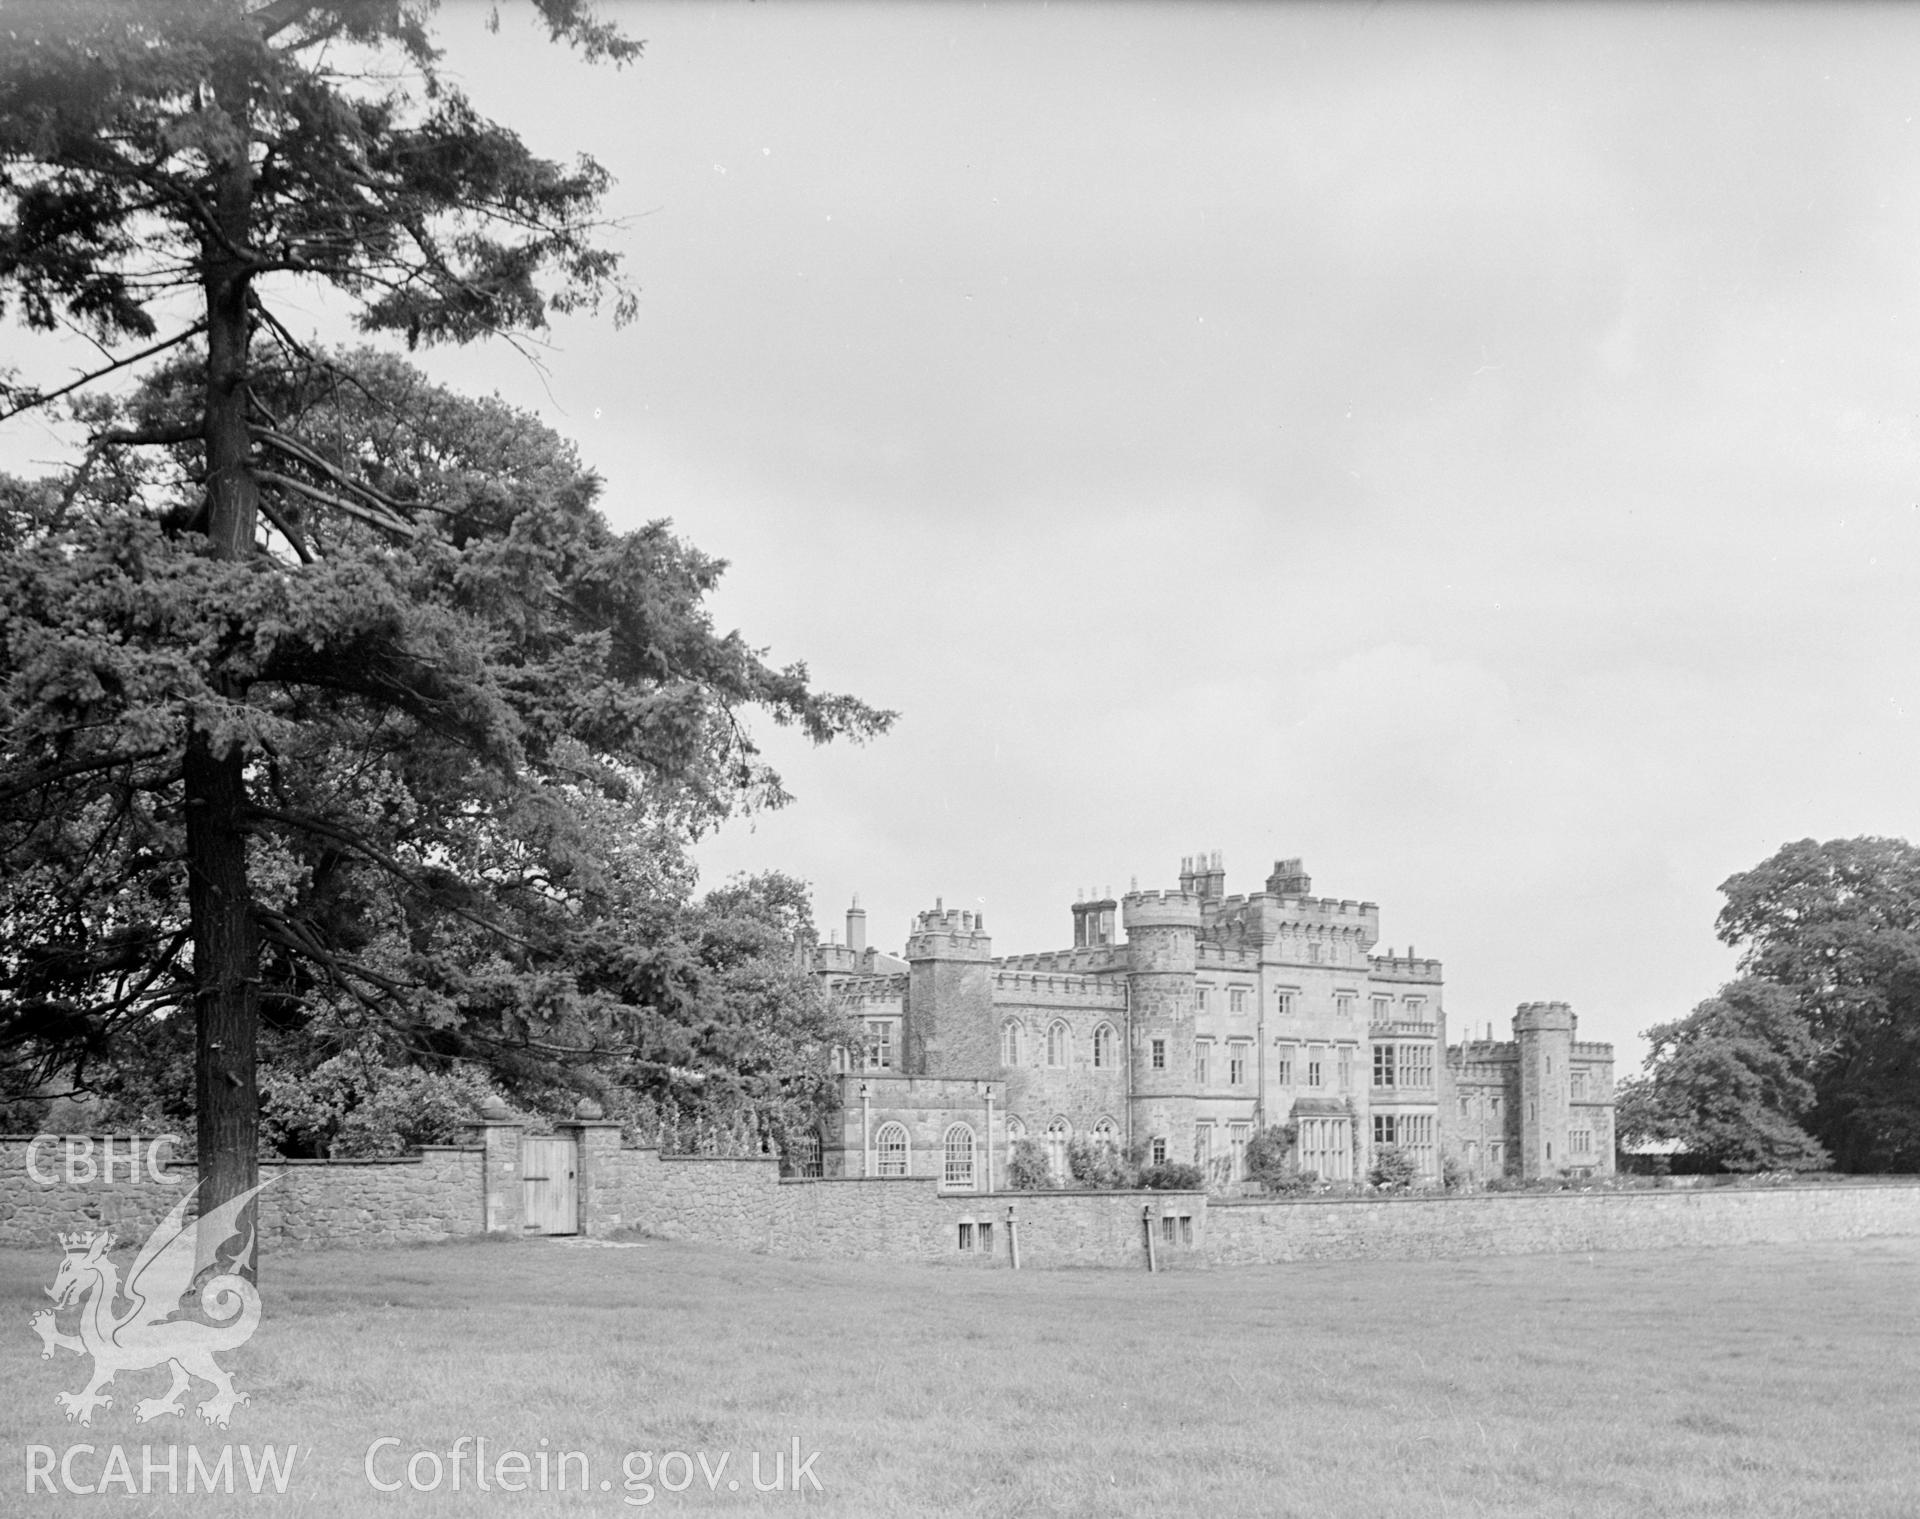 A view of an 18th century castle that takes its name from a ruined castle in its grounds.